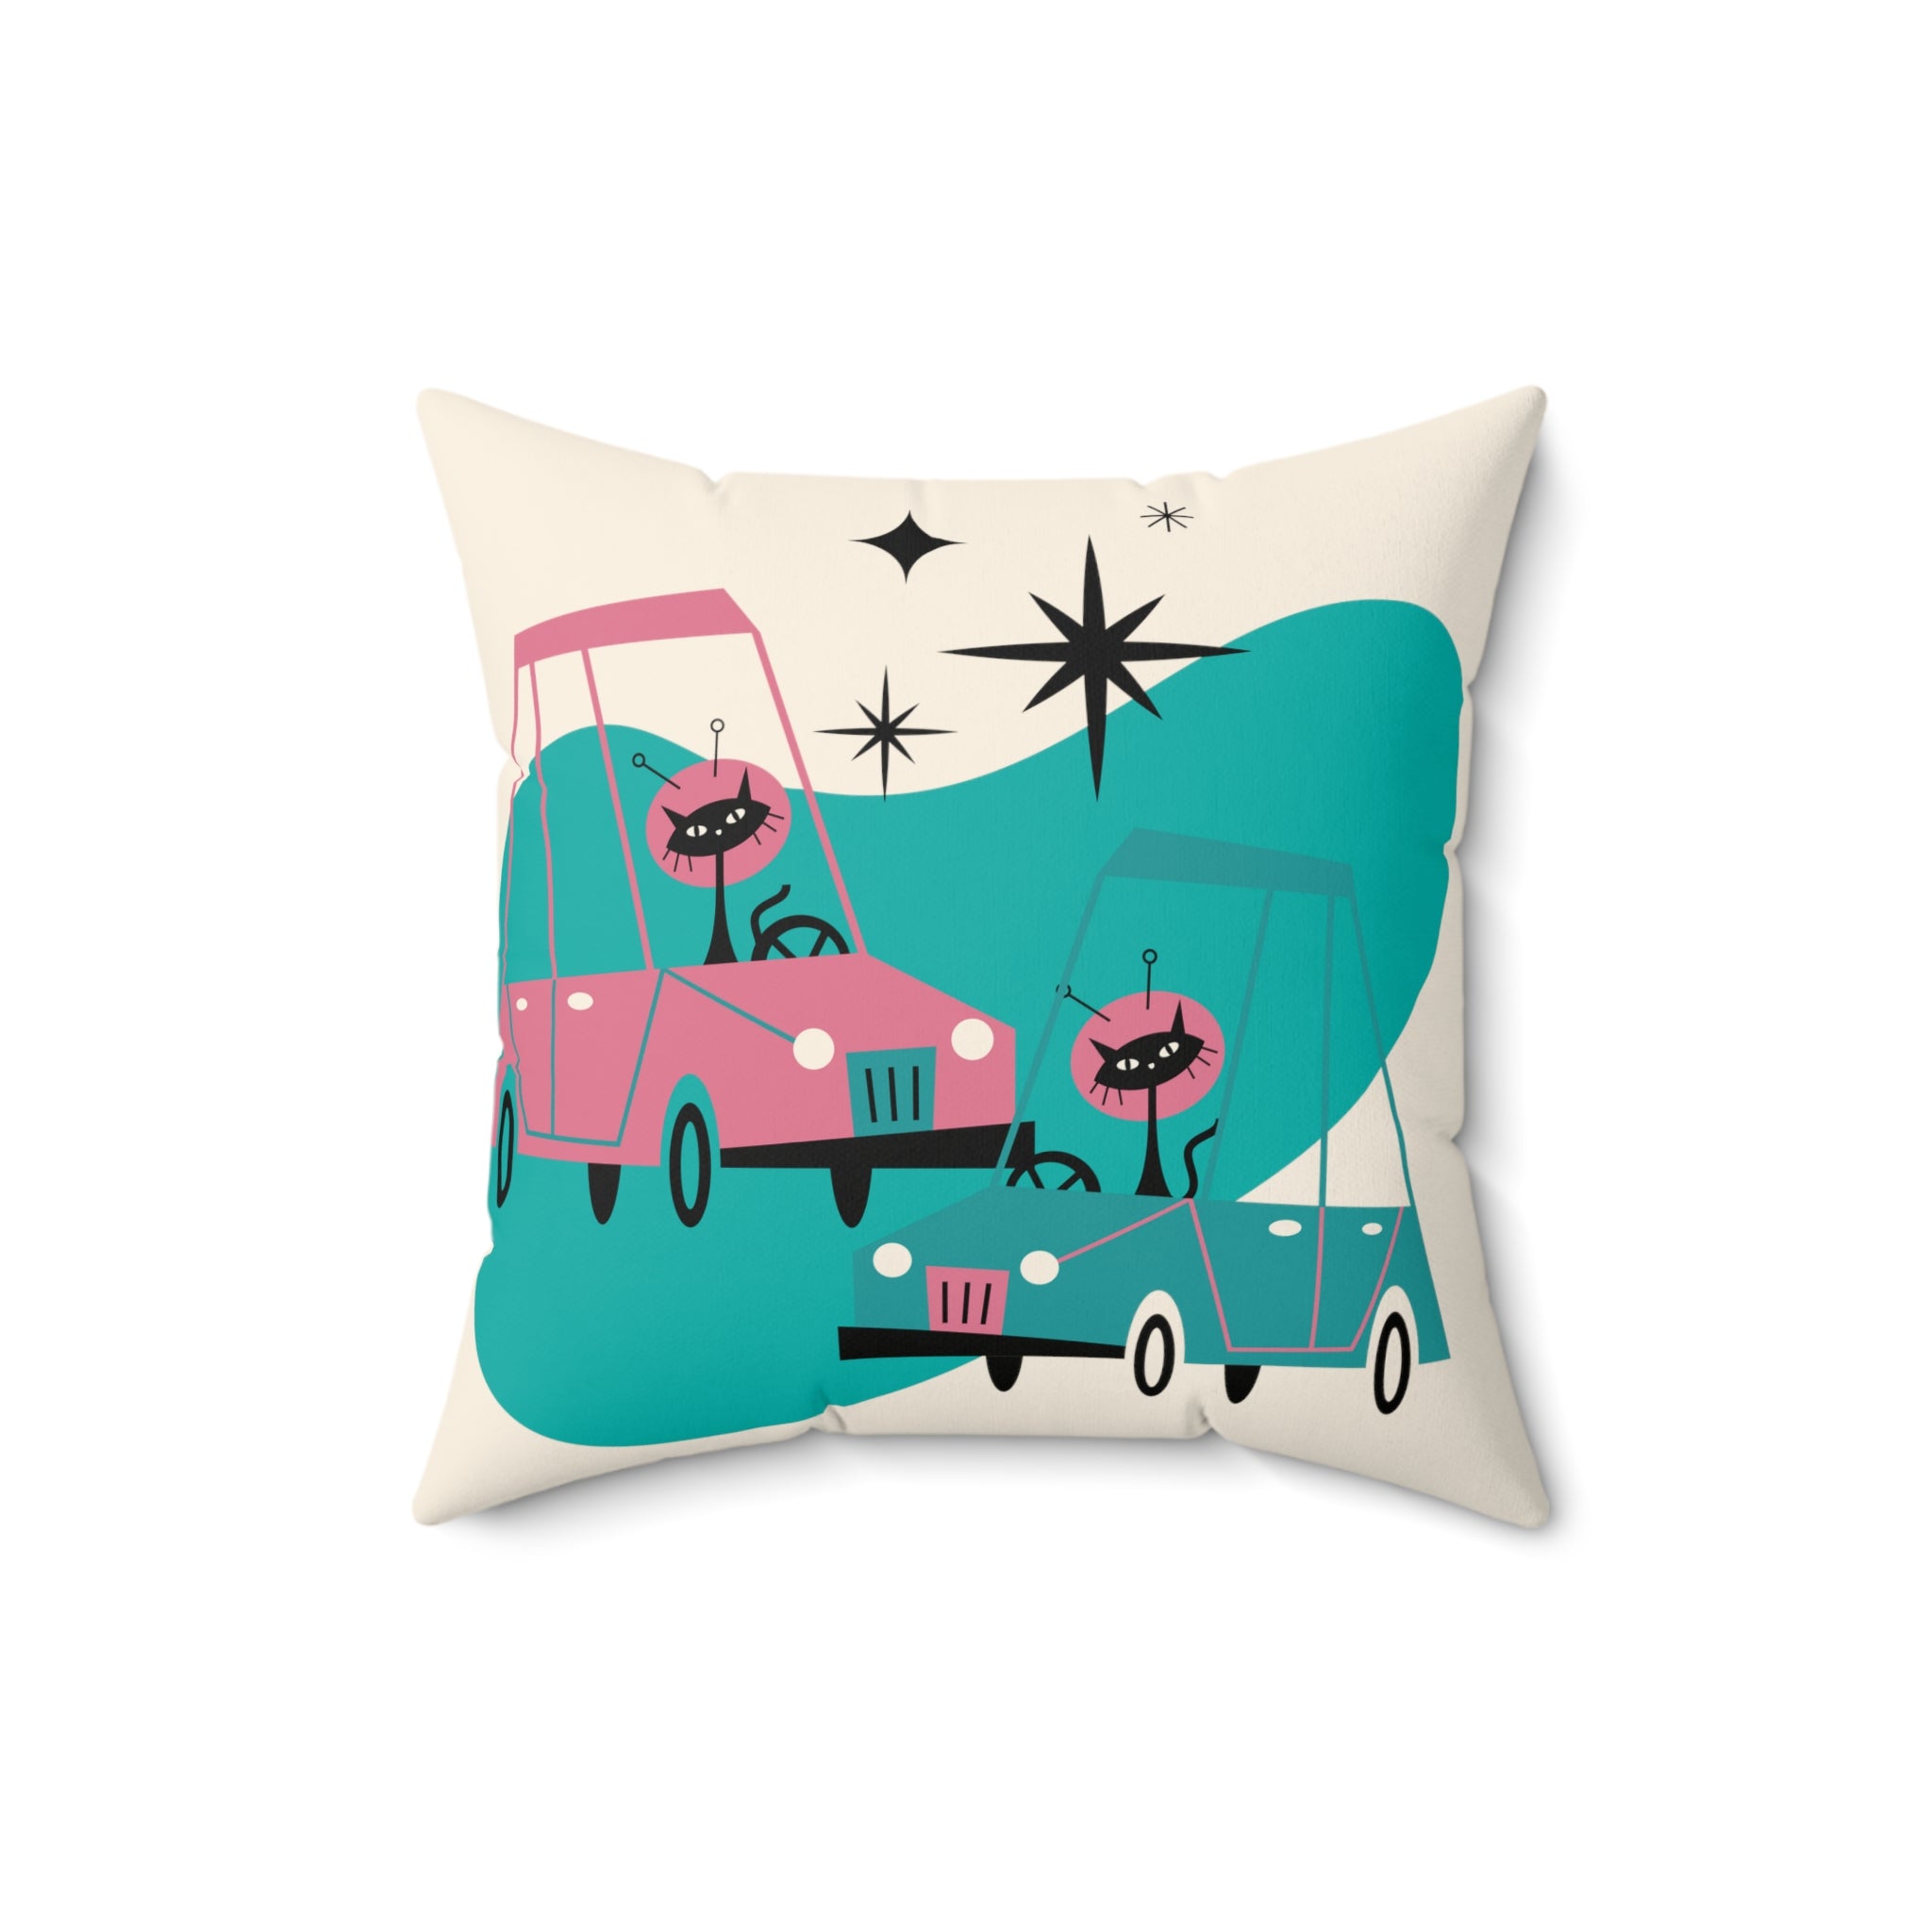 Atomic Space Cats, Beep Beep, Retro Cars, Space Kitties, Kitschy Fun Quirky Throw Pillow With Insert